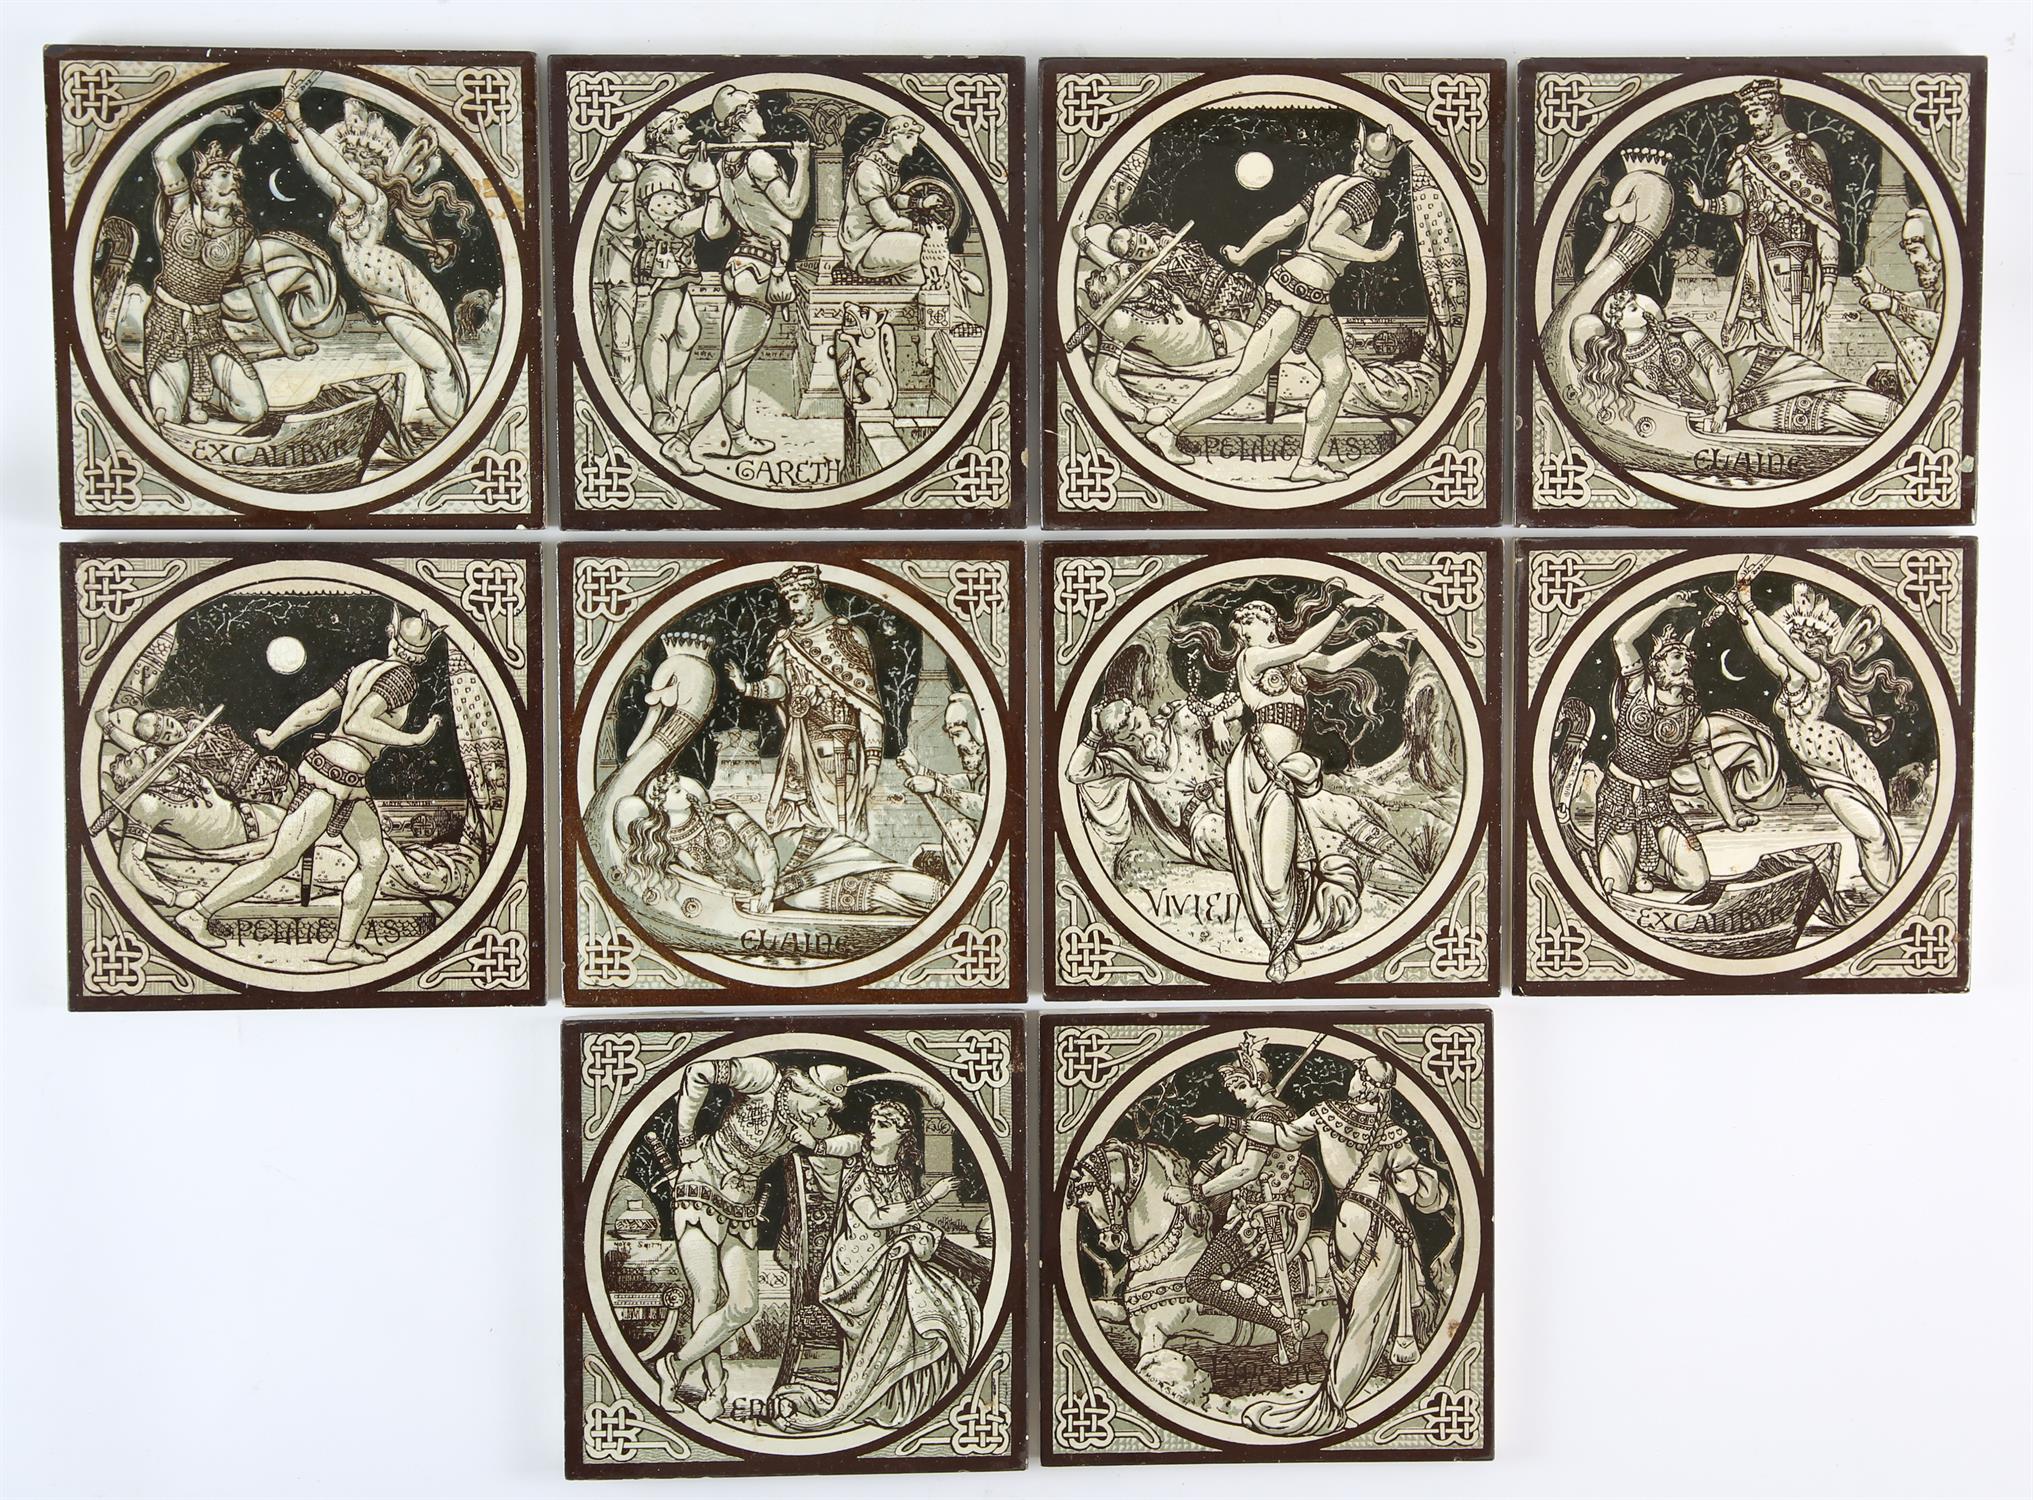 JOHN MOIR SMITH (SCOTTISH, 1839-1912), set of ten tiles, printed with scenes from Idyles of the